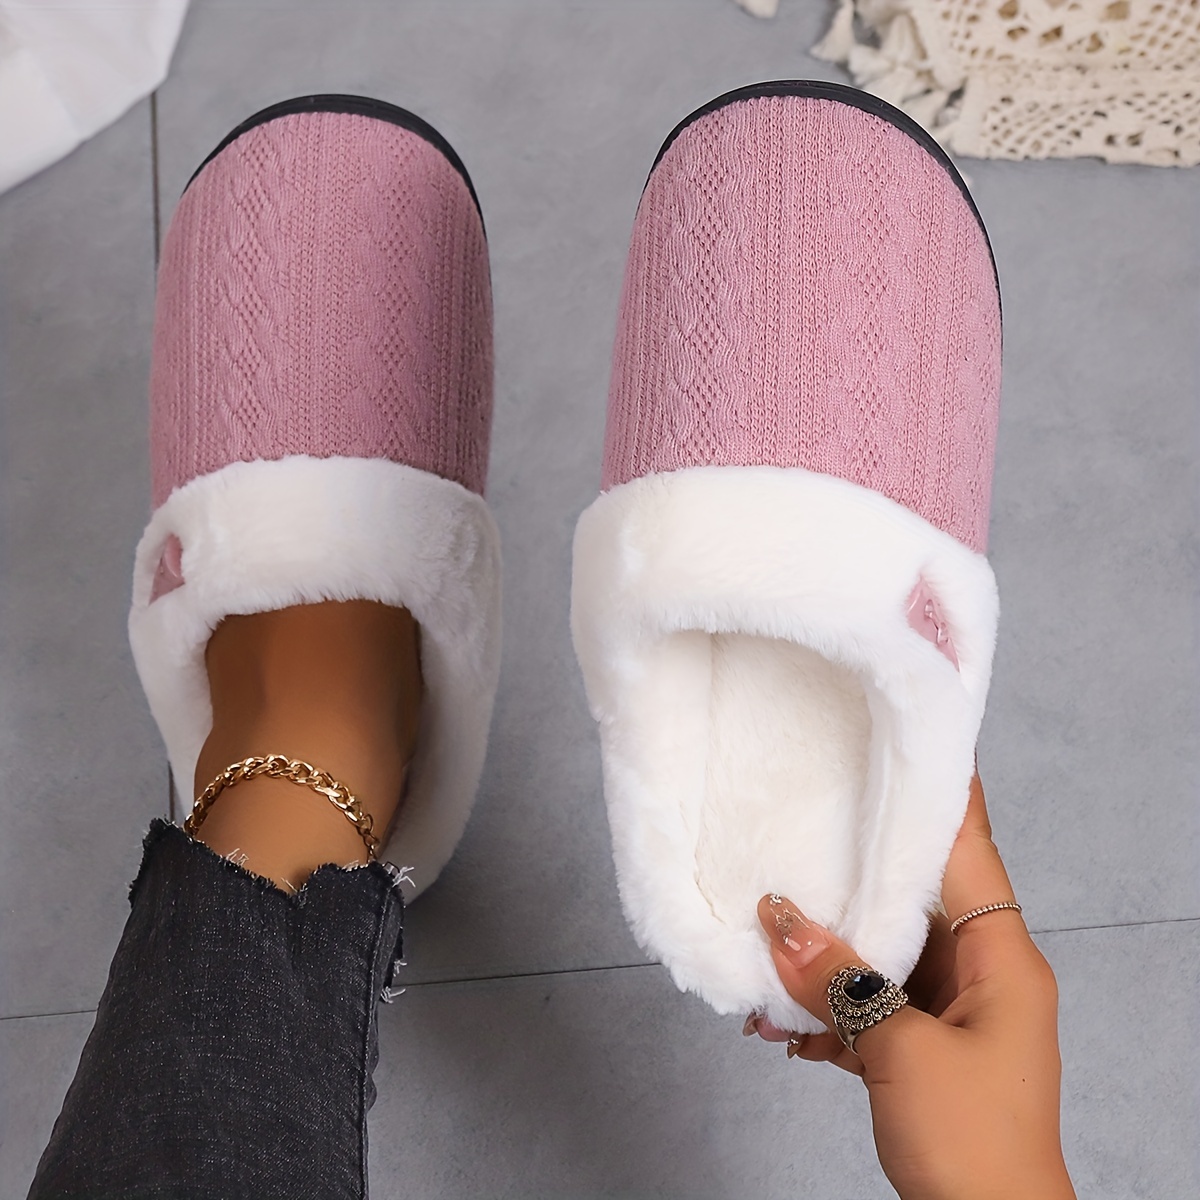 

Solid Color Warm Home Slipper, Slip On Round Toe Non-slip Soft Sole Fluffy Slides Shoes, Plush Indoor Cozy Shoes